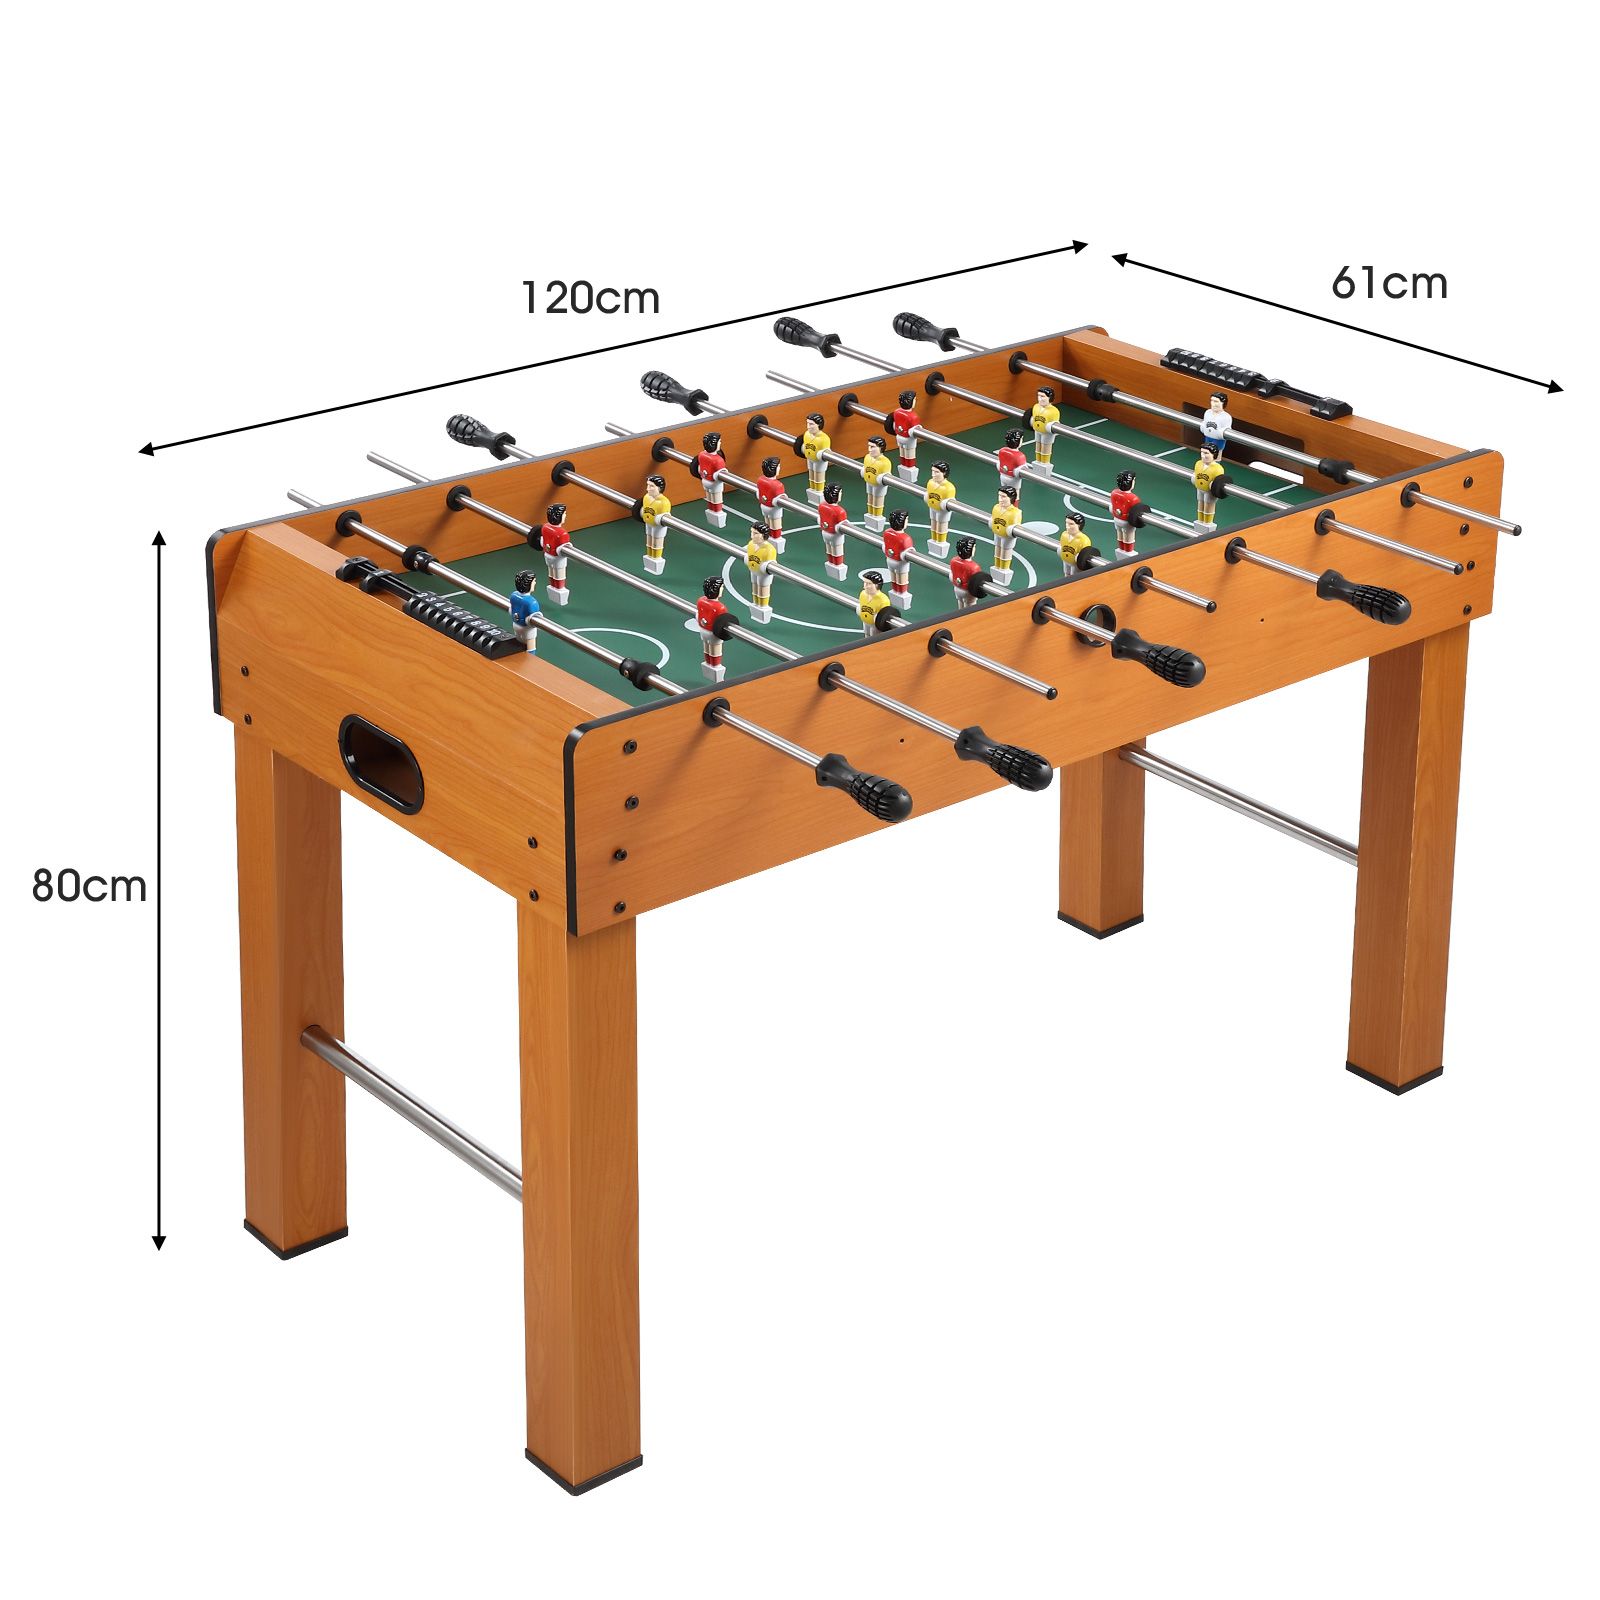 Foosball Table Soccer Football Gaming Desk Tabletop Competition Sport Room Indoor Game Family Party Entertainment Toy